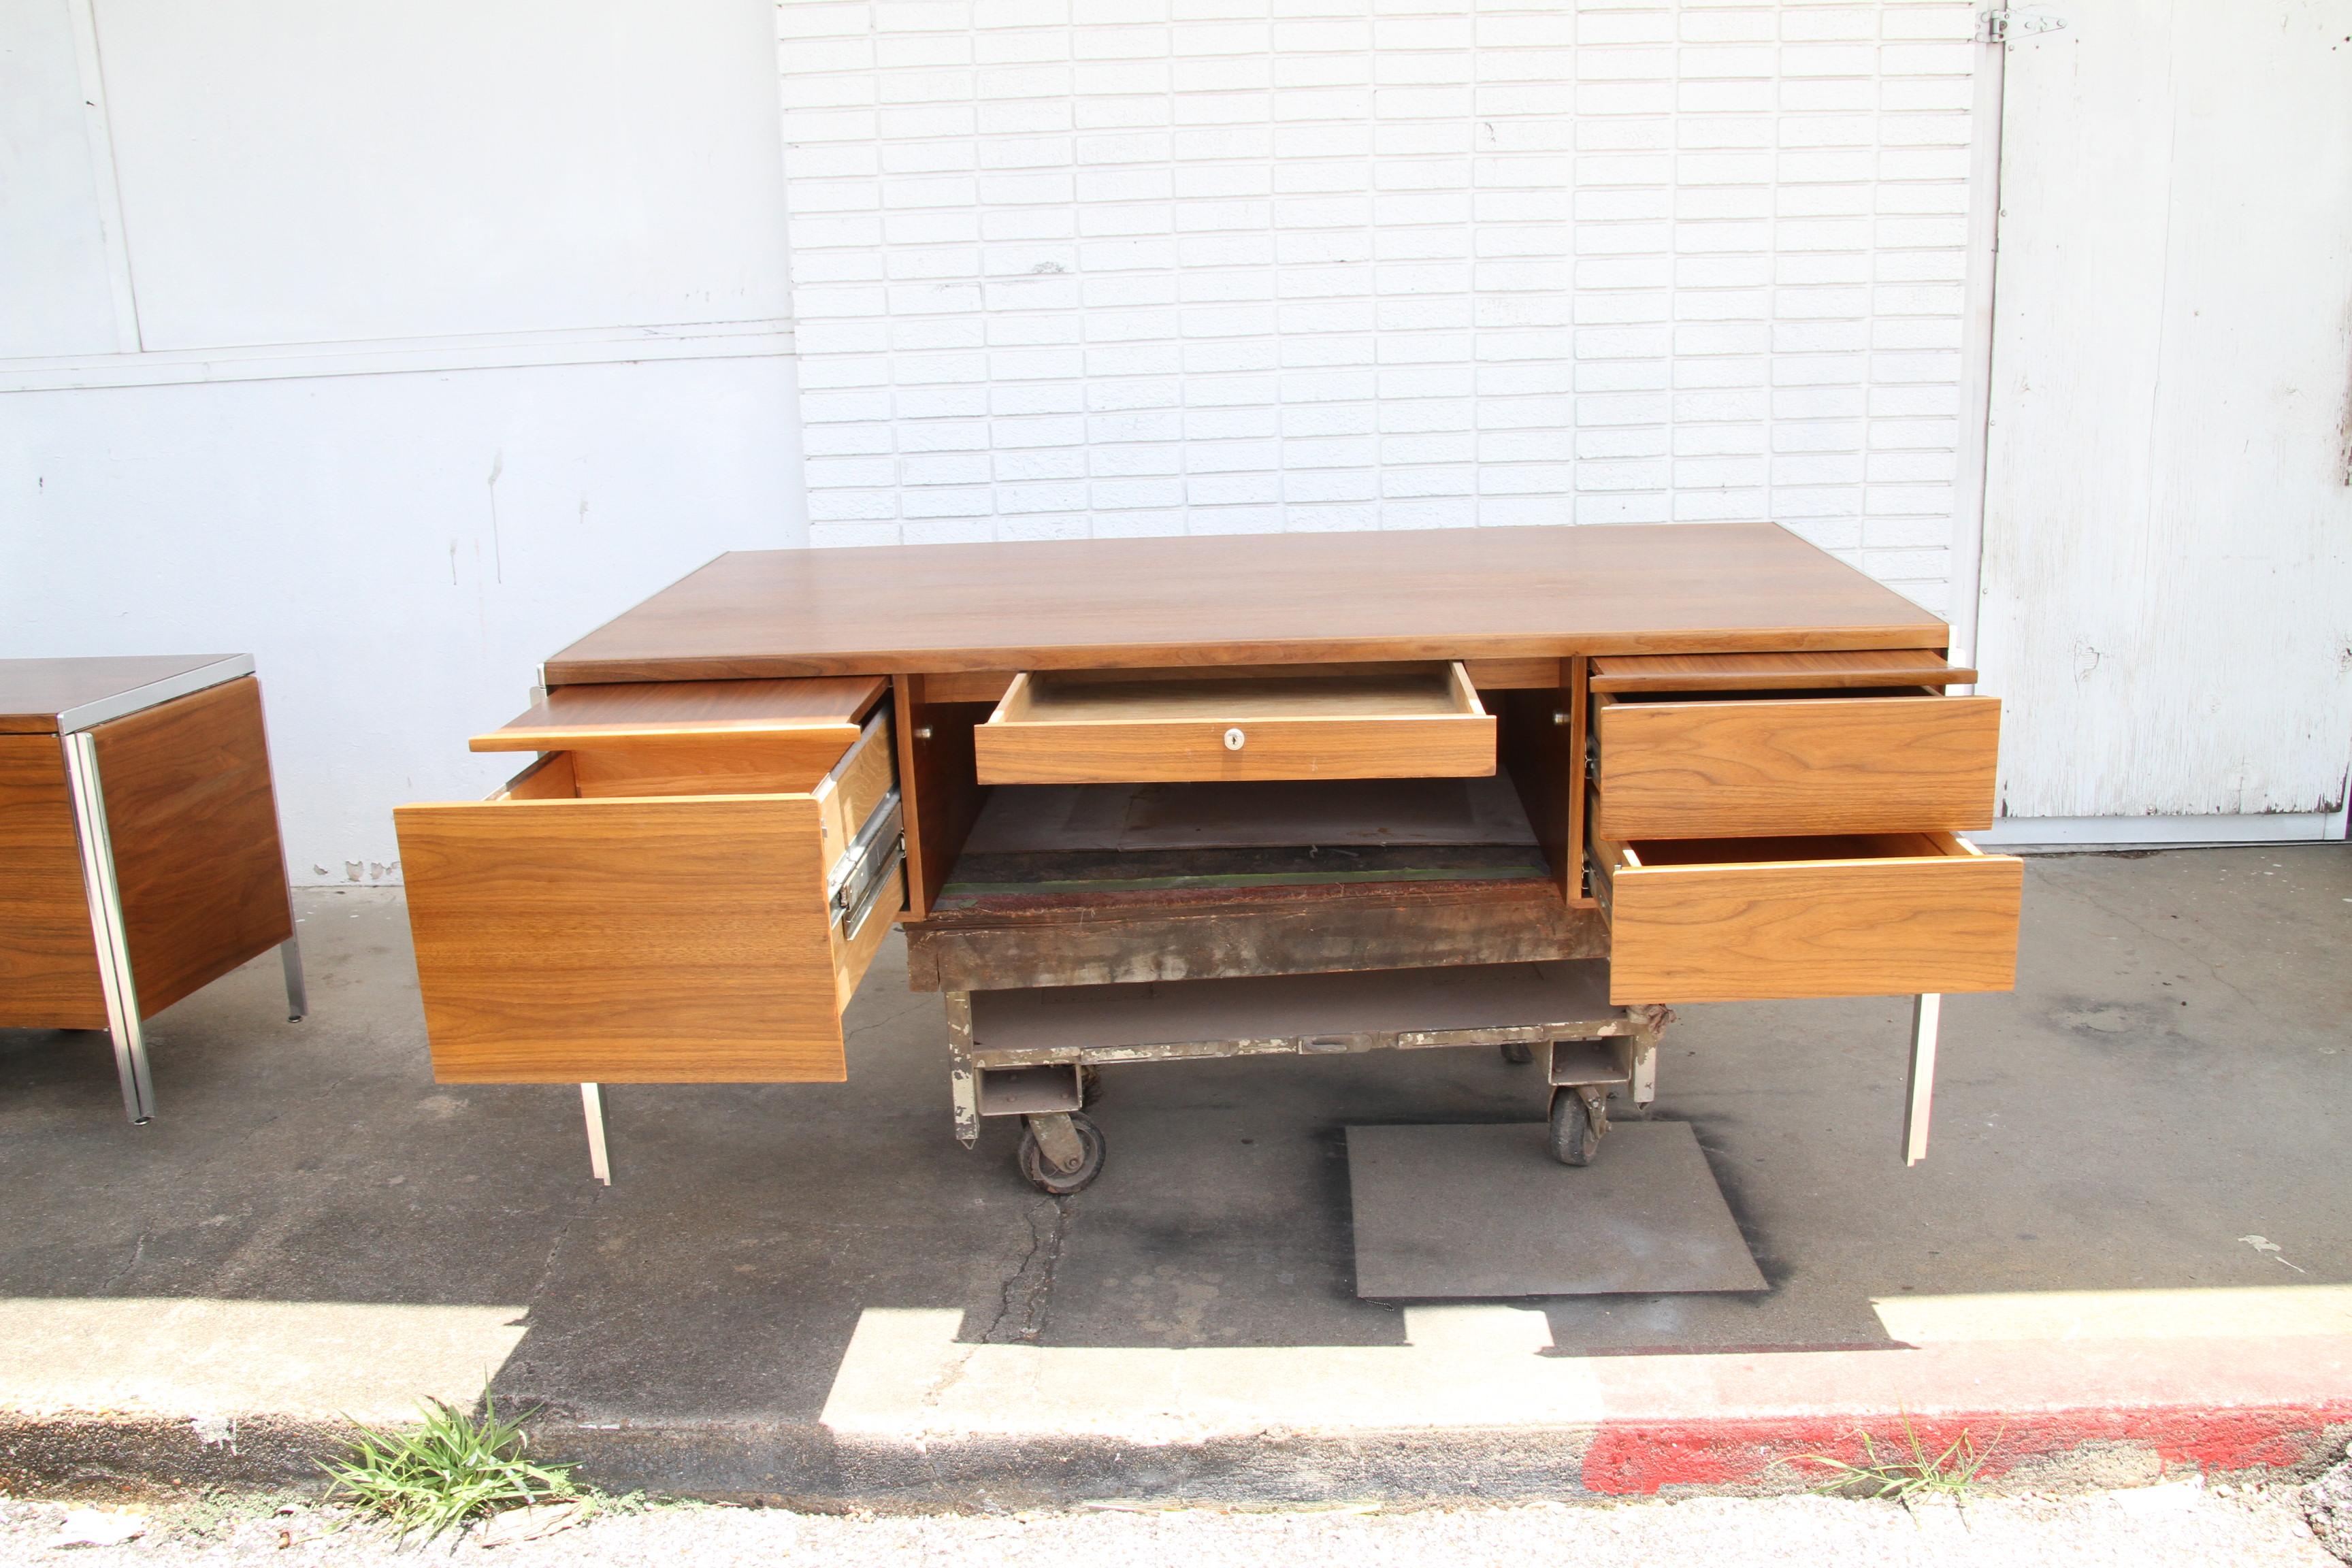 North American Mid-Century Modern Walnut and Aluminium Desk by Alexis Yermakov for Stow Davis For Sale